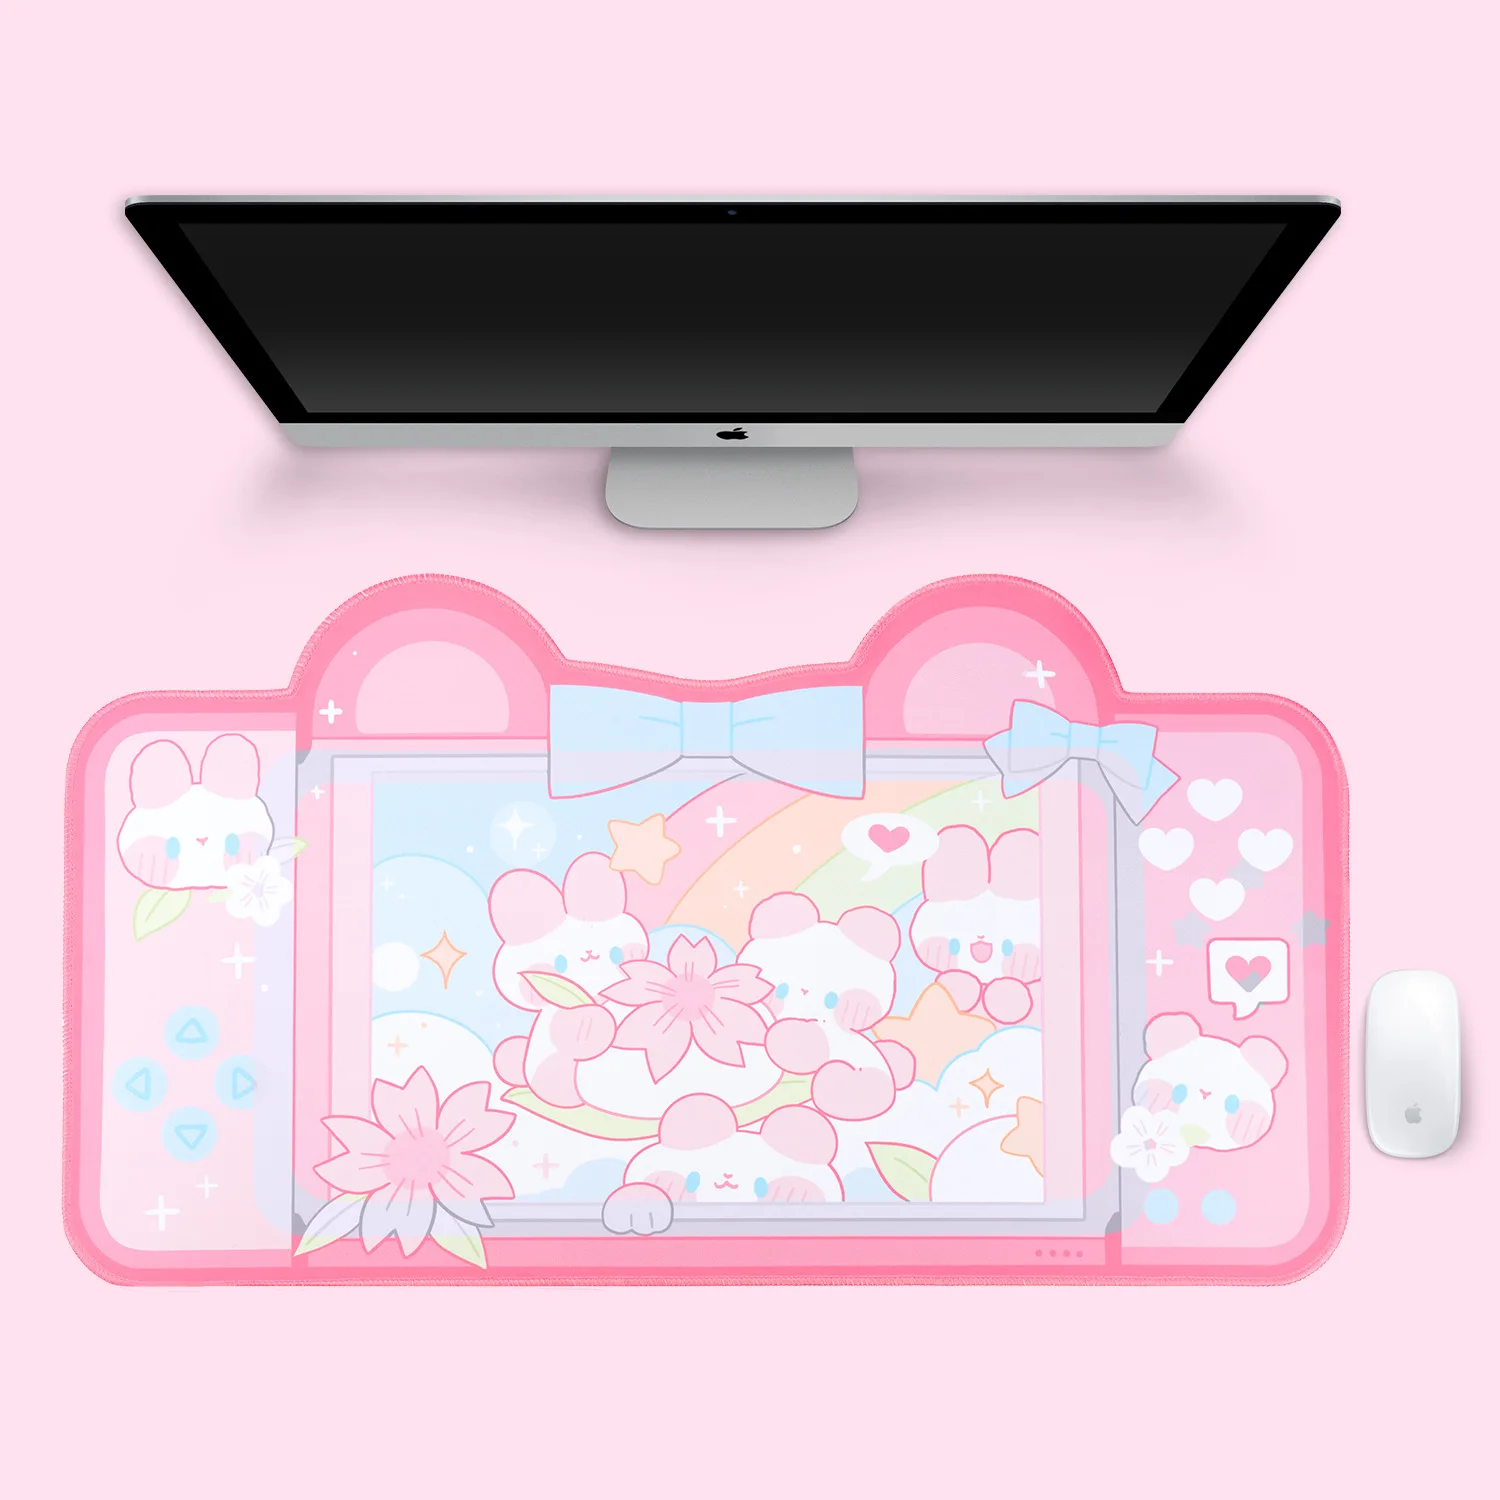 

Green Accessories Laptop Proof Frog Extra Cute Water Pink Pastel Large XXL Mouse Gaming Nonslip Desk Mat Kawaii Pad Desk